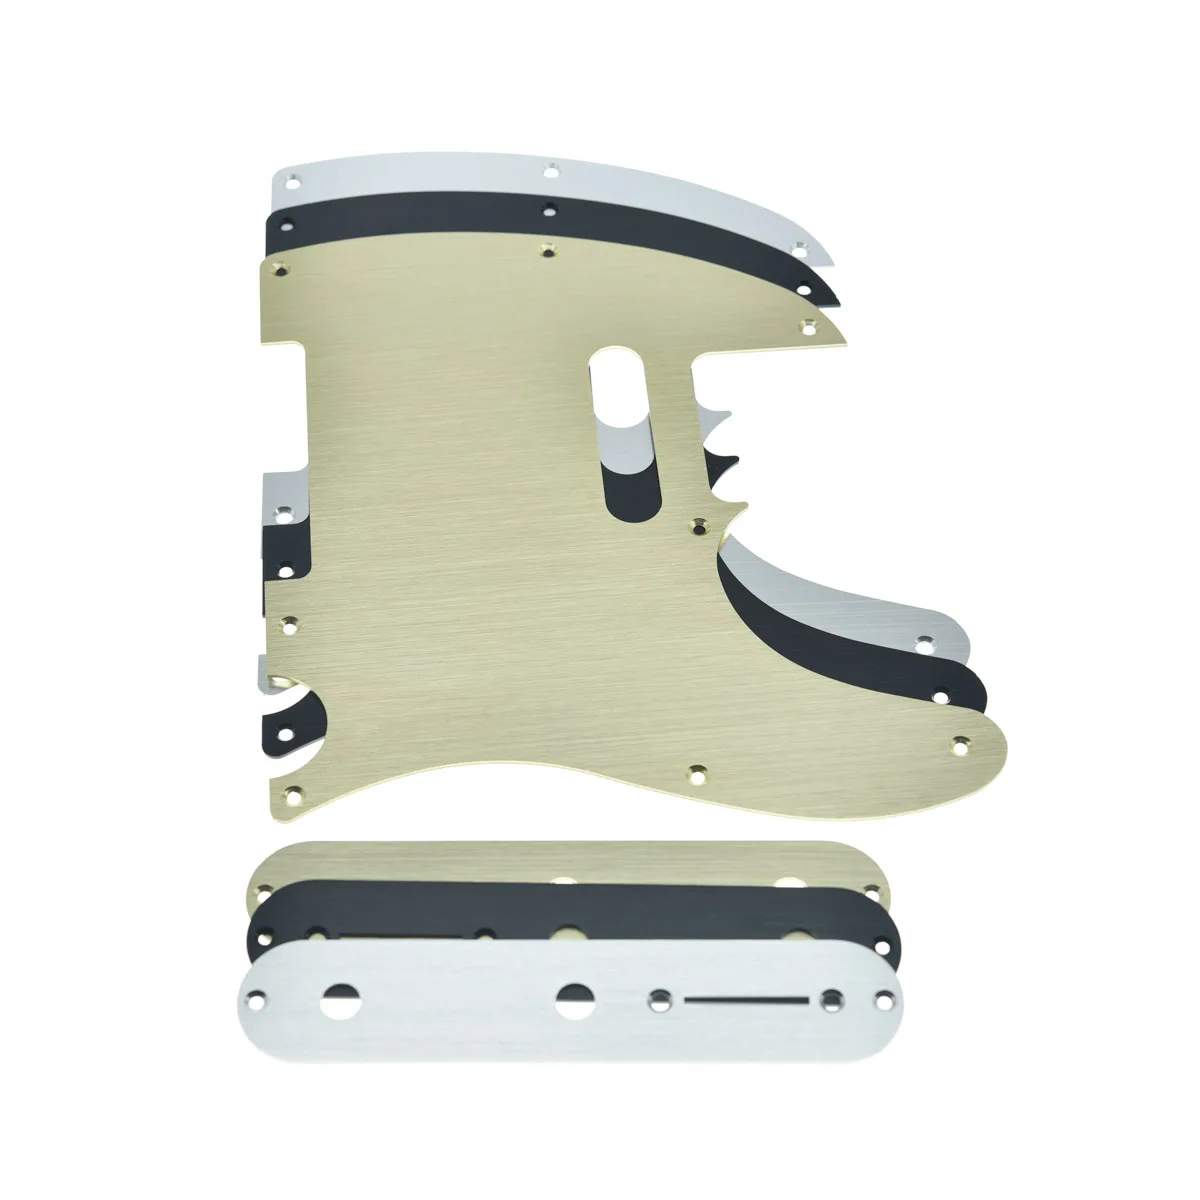 Dopro Metal Aluminum Anodized 8 Hole Tele Pickguard with Metal Control Plate and Screws Fits for American/Mexican Telecaster